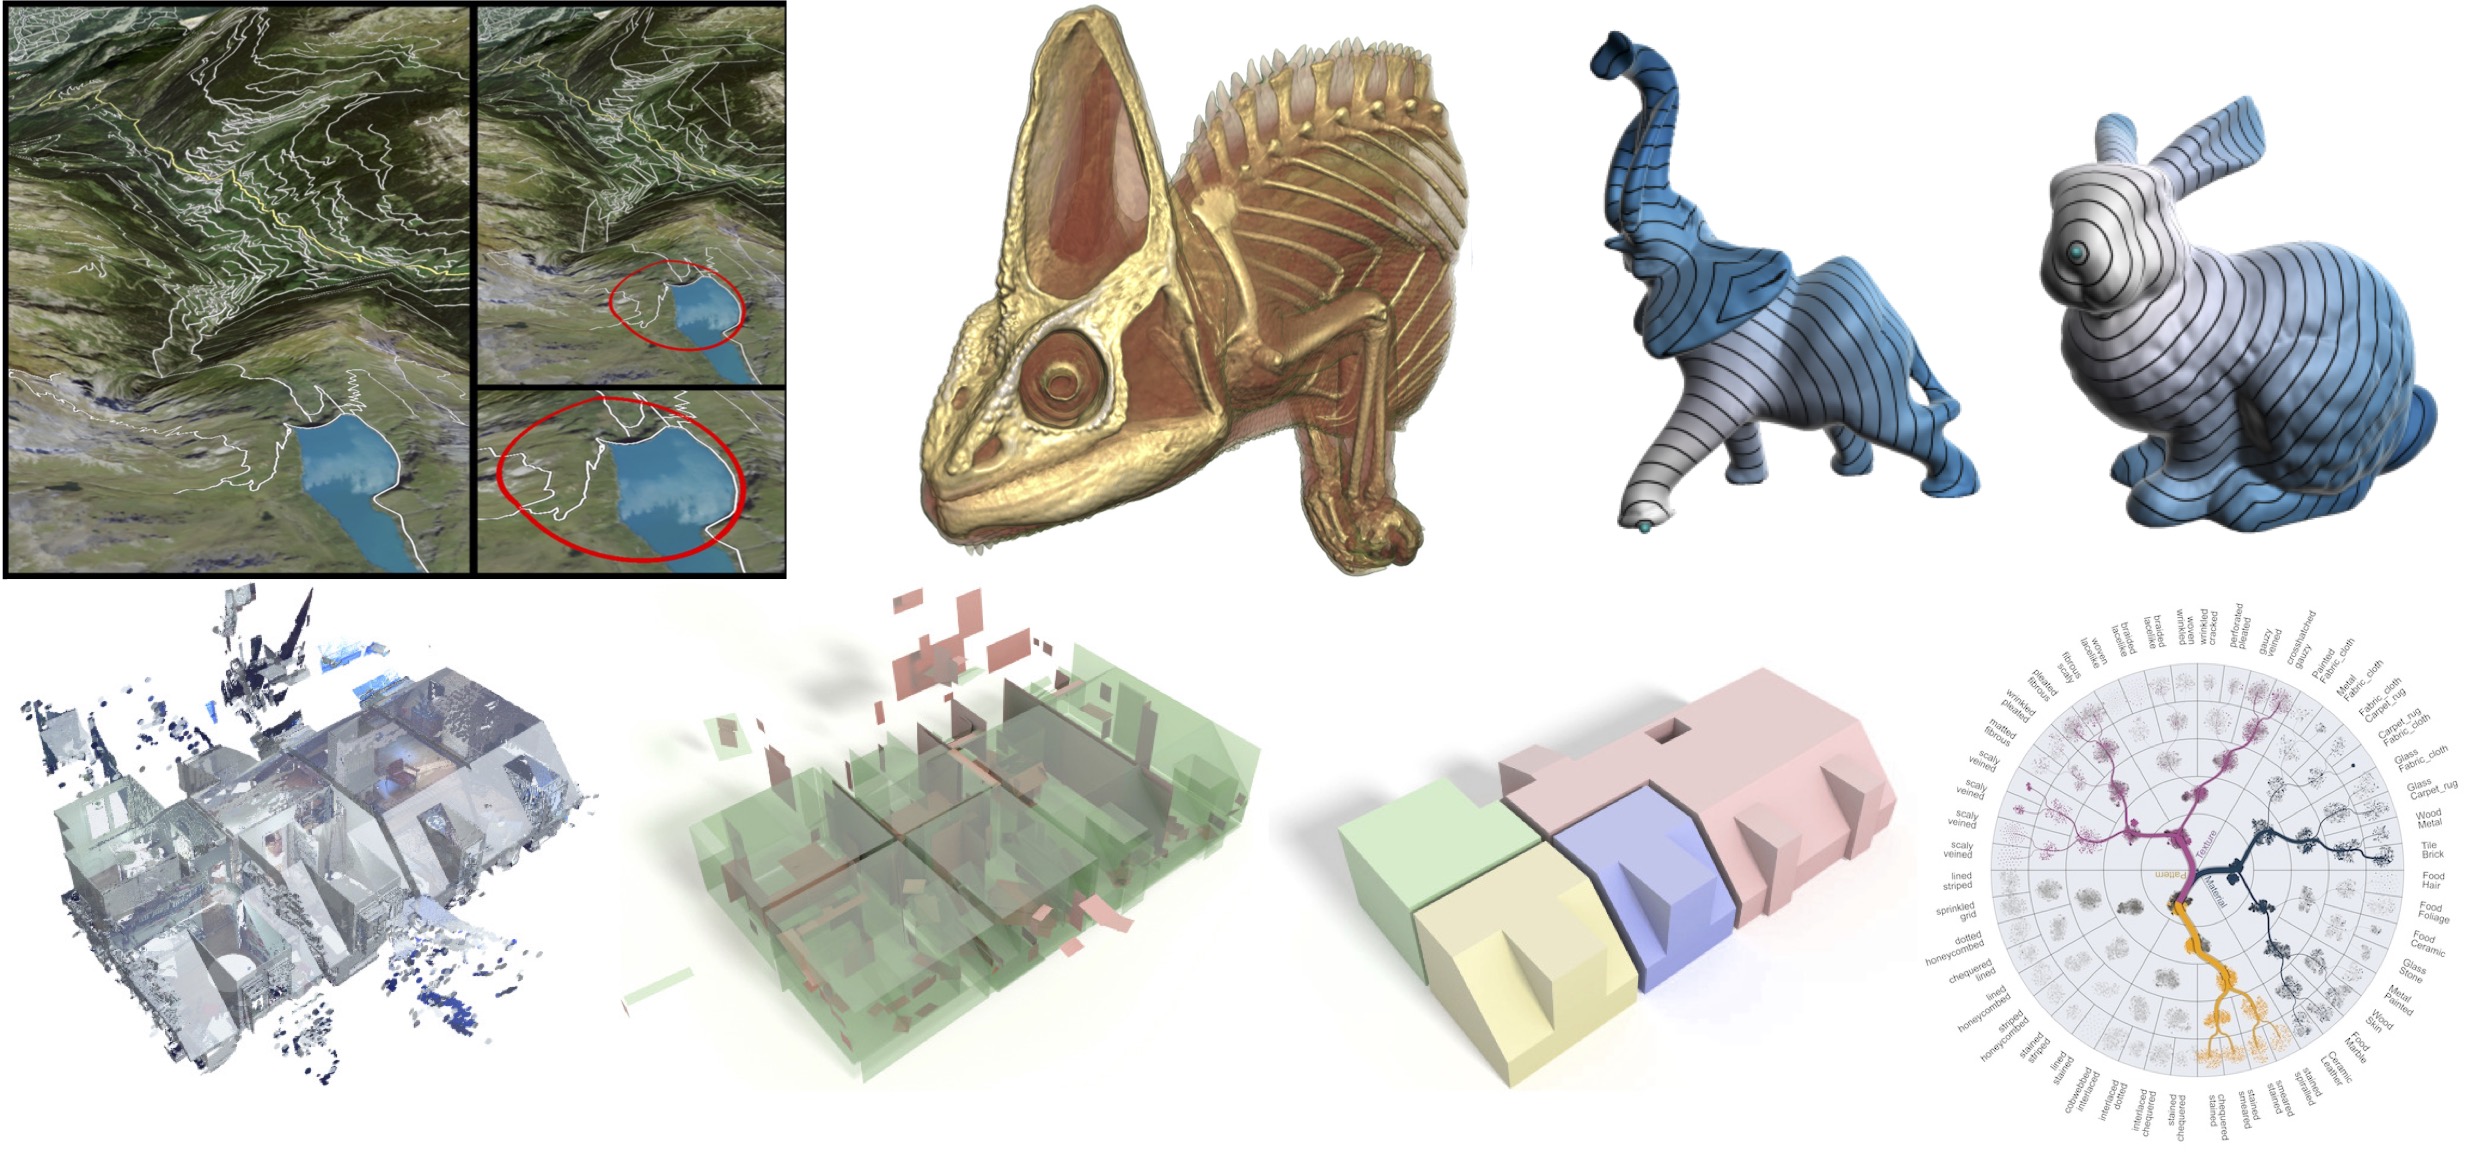 Example images of research activities